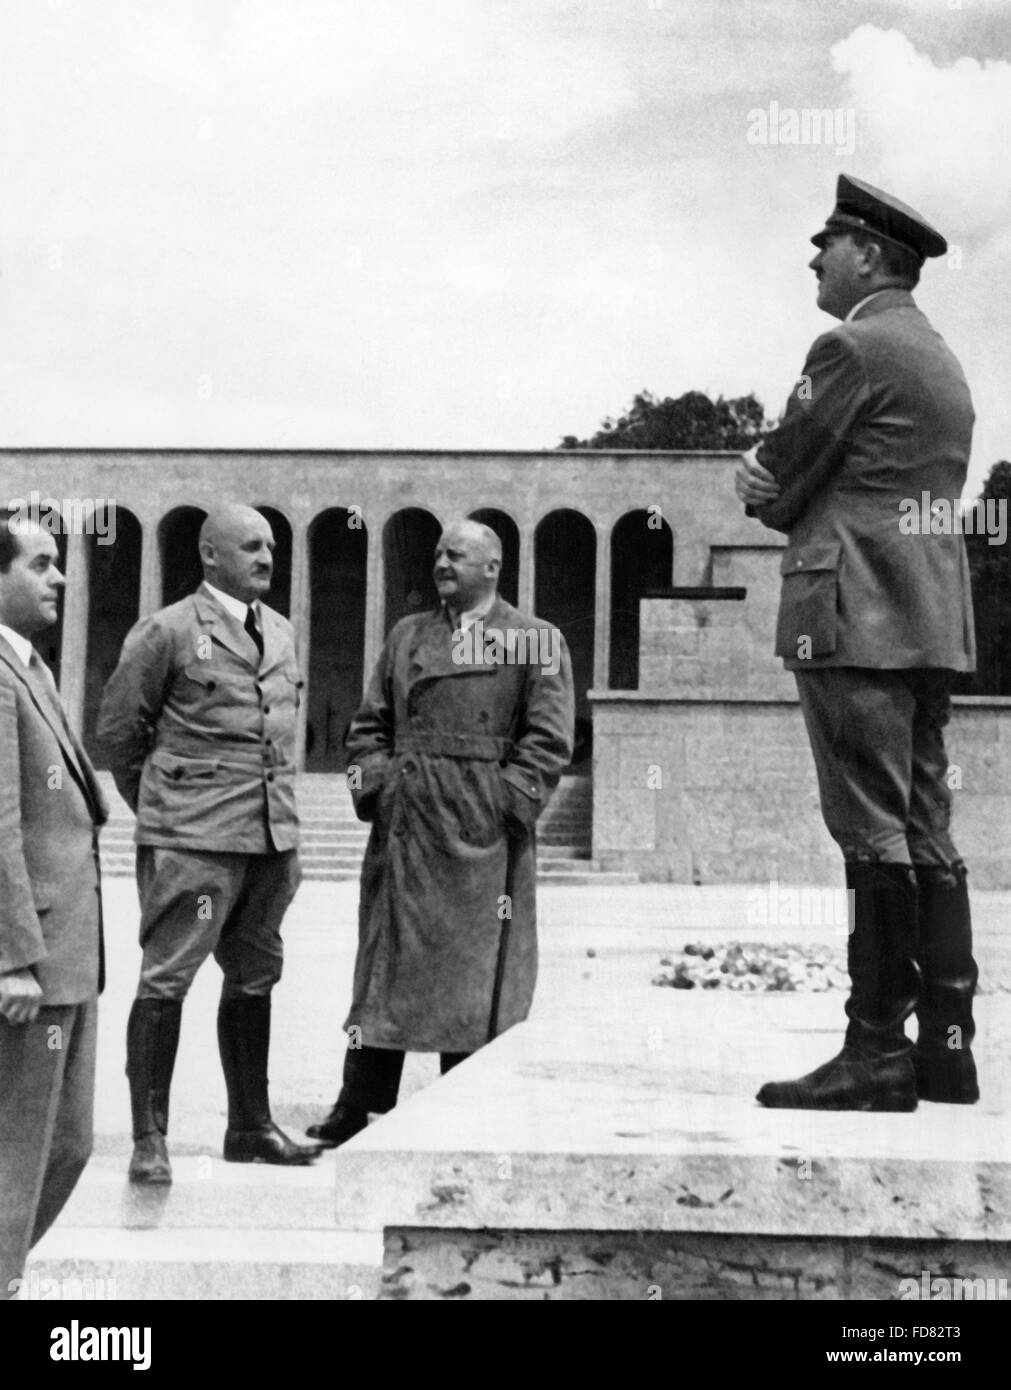 Adolf Hitler inspects the rally grounds in Nuremberg, 1936 Stock Photo